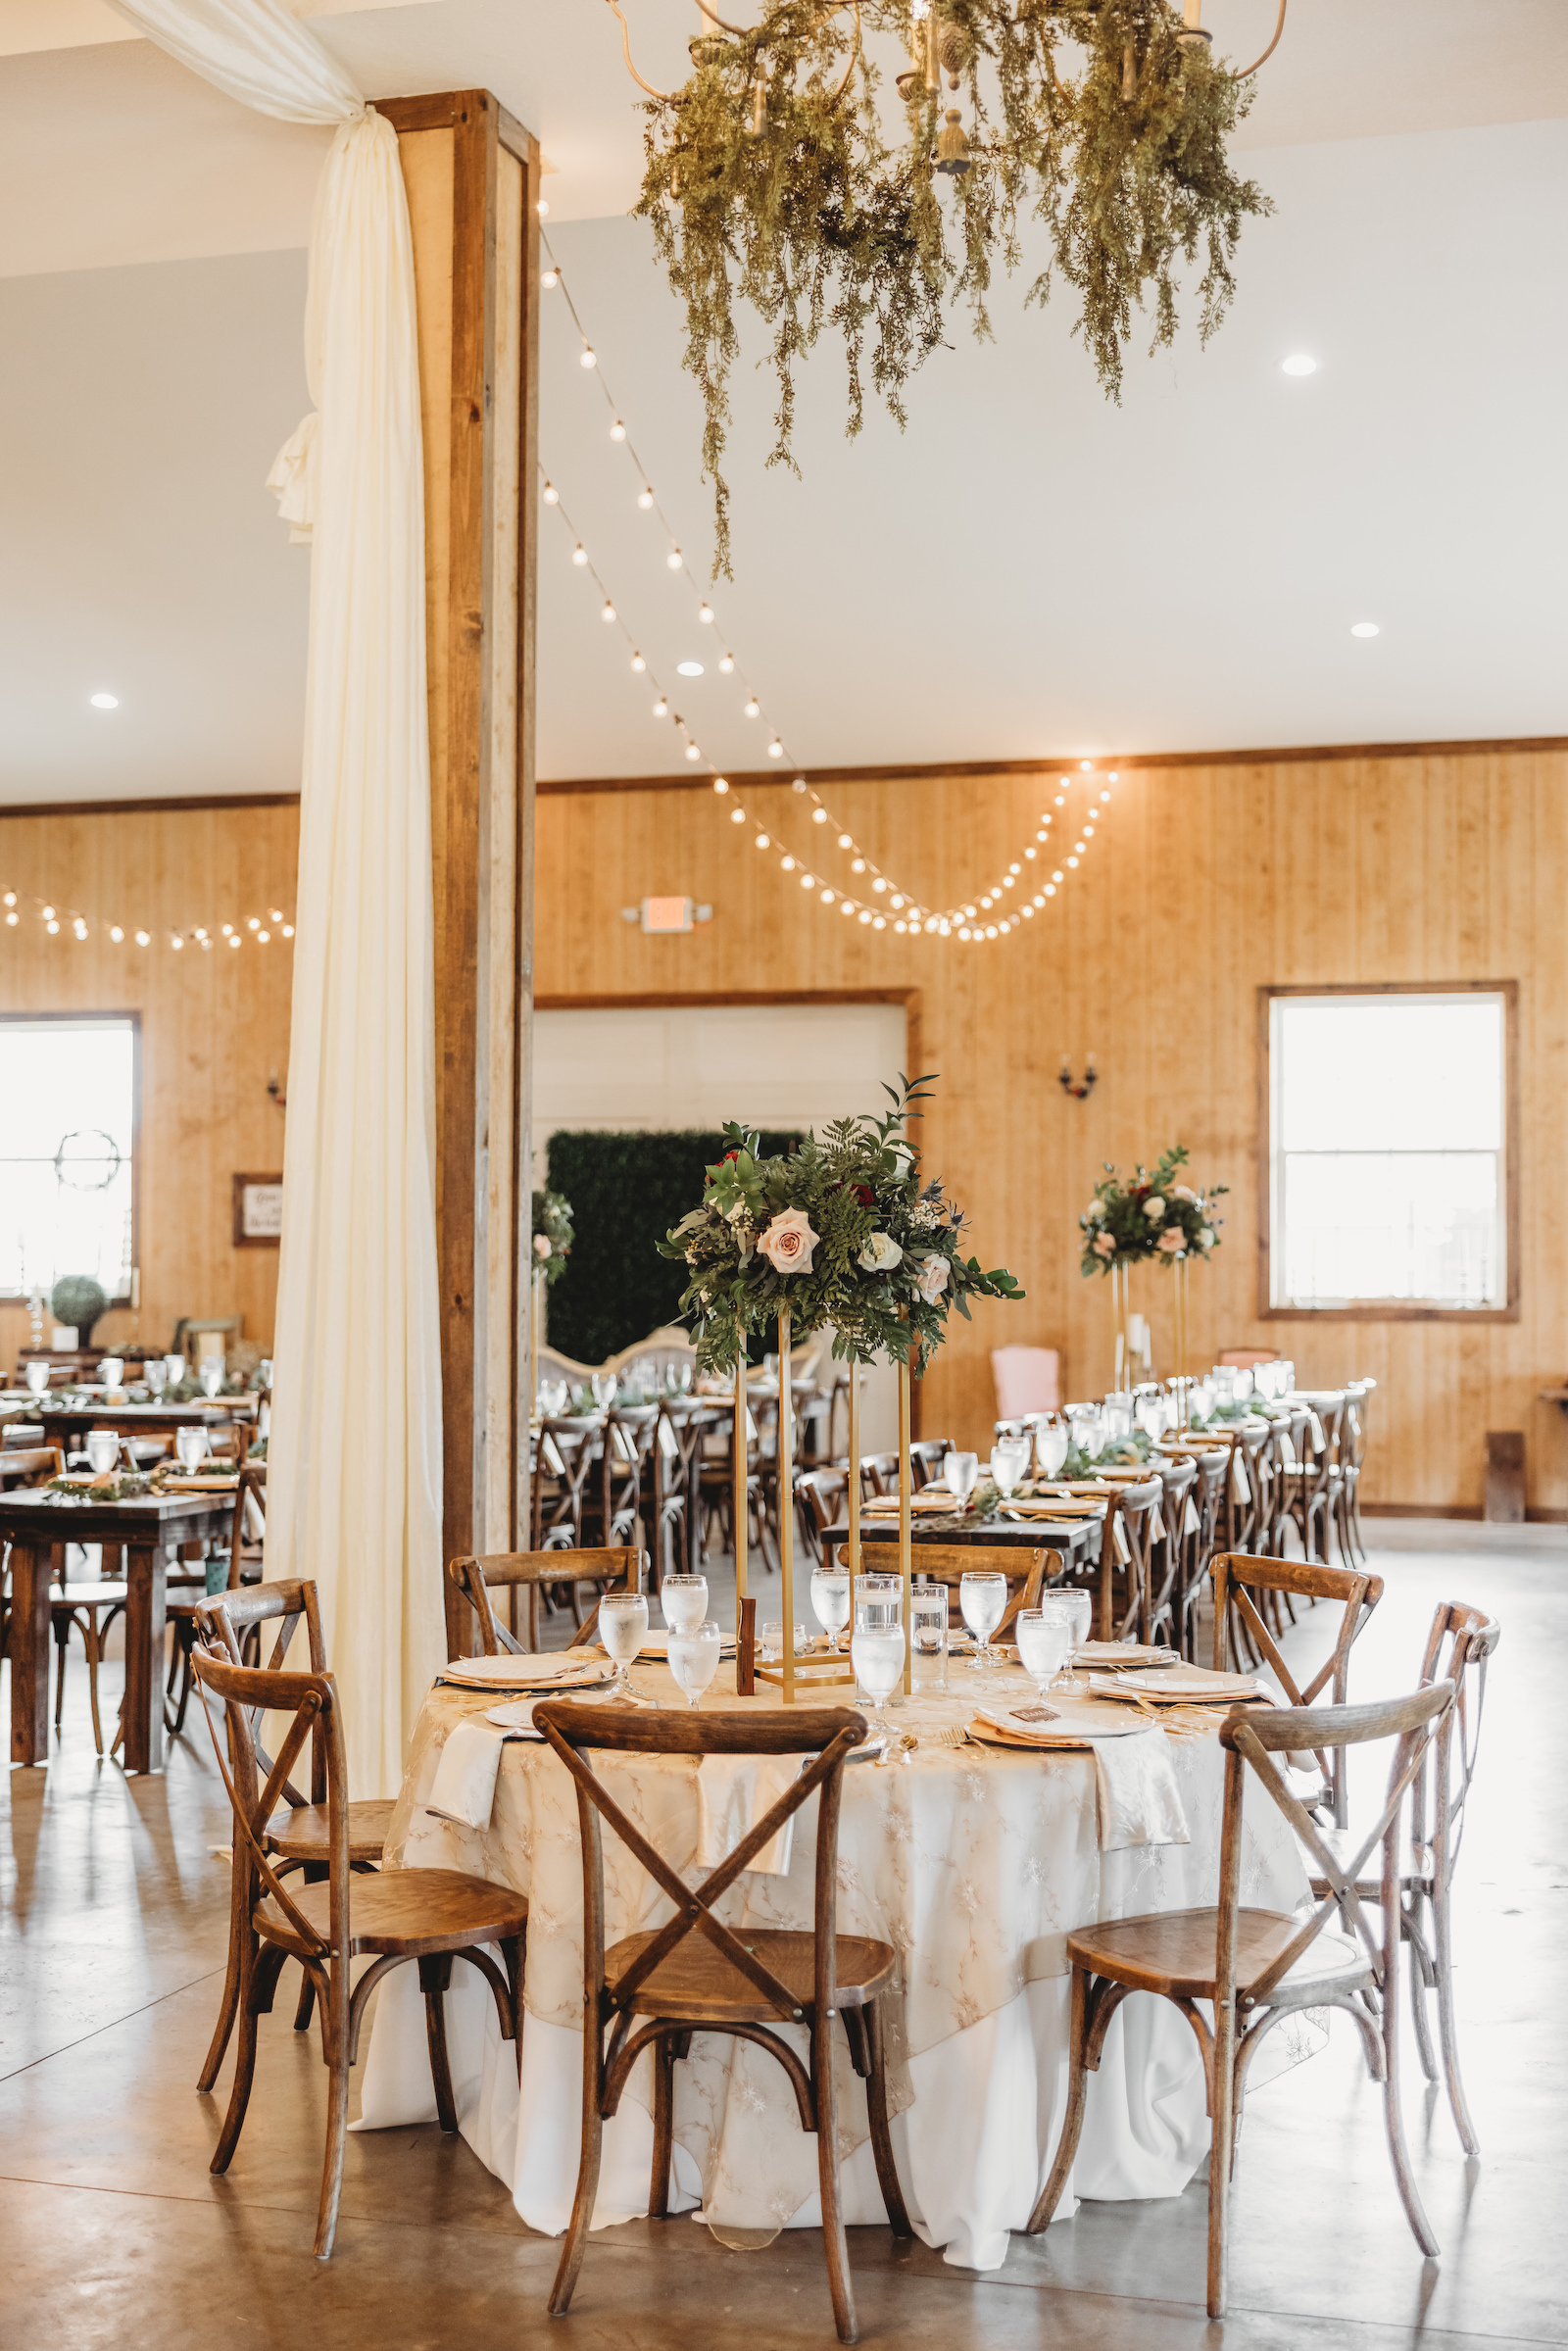 Rustic Wedding Reception with Greenery Tablescapes and Gold Tall Floral Centerpieces with Pink Roses and Greenery | Rustic Wedding with Gold Accents Tampa Bay Covington Farm